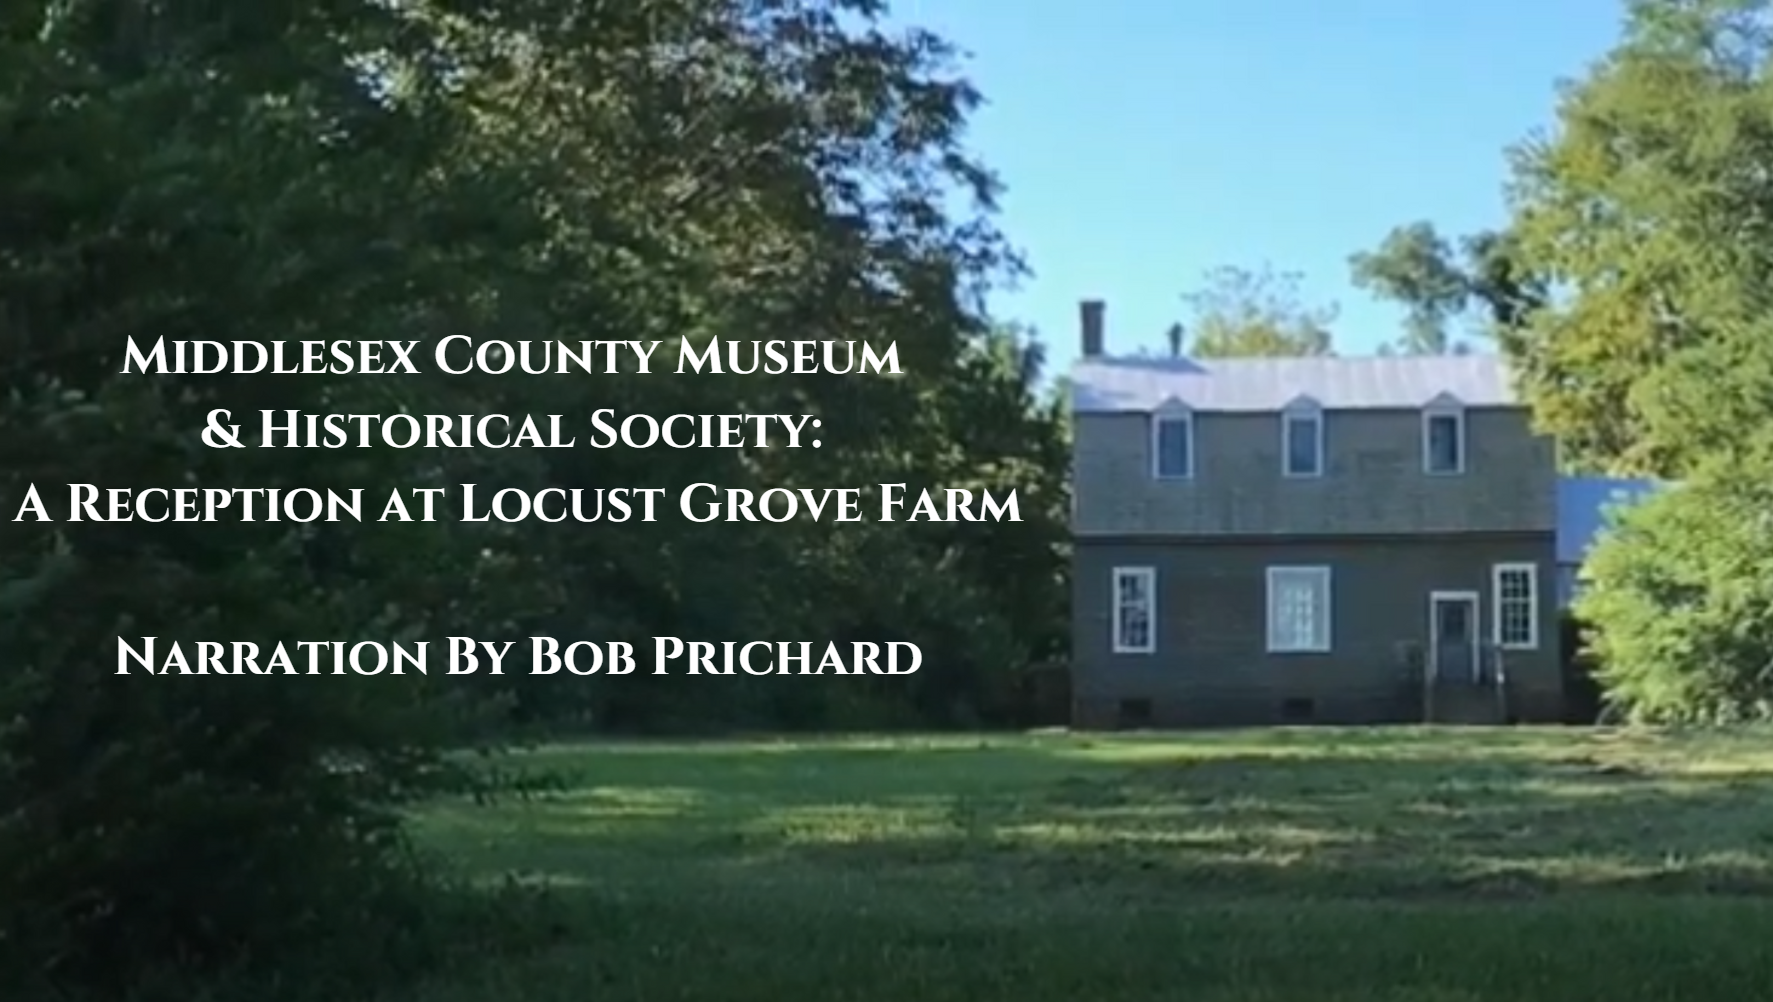 Middlesex County Museum & Historical Society: A Reception At Locust Grove Farm